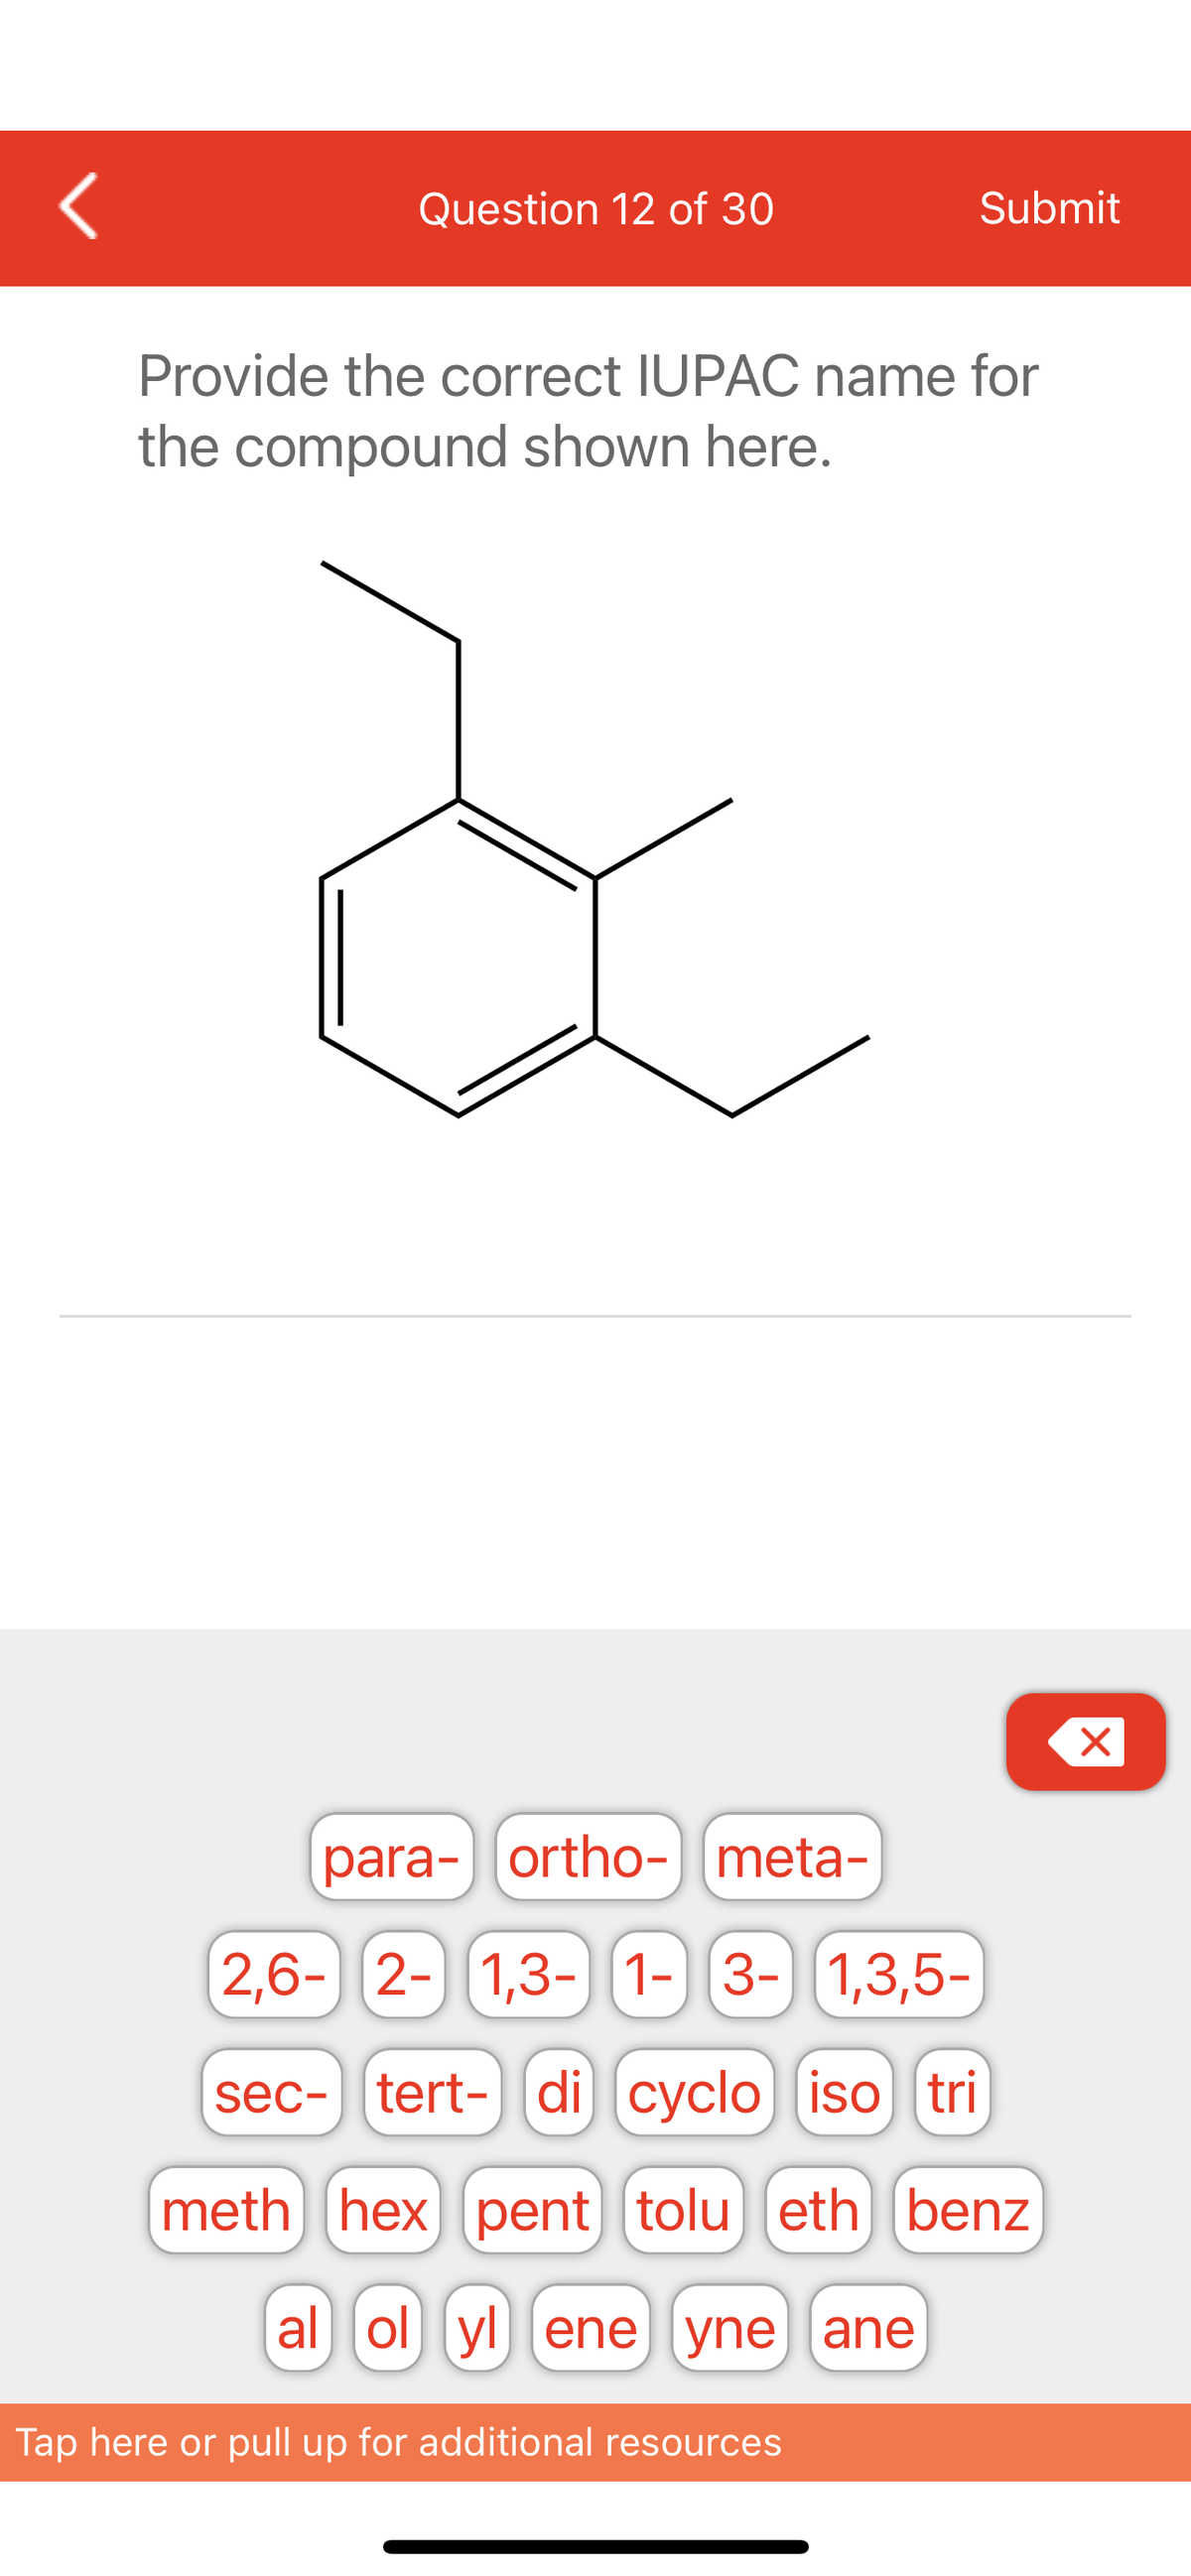 <
Question 12 of 30
Submit
Provide the correct IUPAC name for
the compound shown here.
para-ortho- meta-
2,6- 2- 1,3- 1- 3- 1,3,5-
sec- tert-di cyclo iso tri
meth hex pent] (tolu] (eth benz
al ol yl ene yne ane
Tap here or pull up for additional resources
X